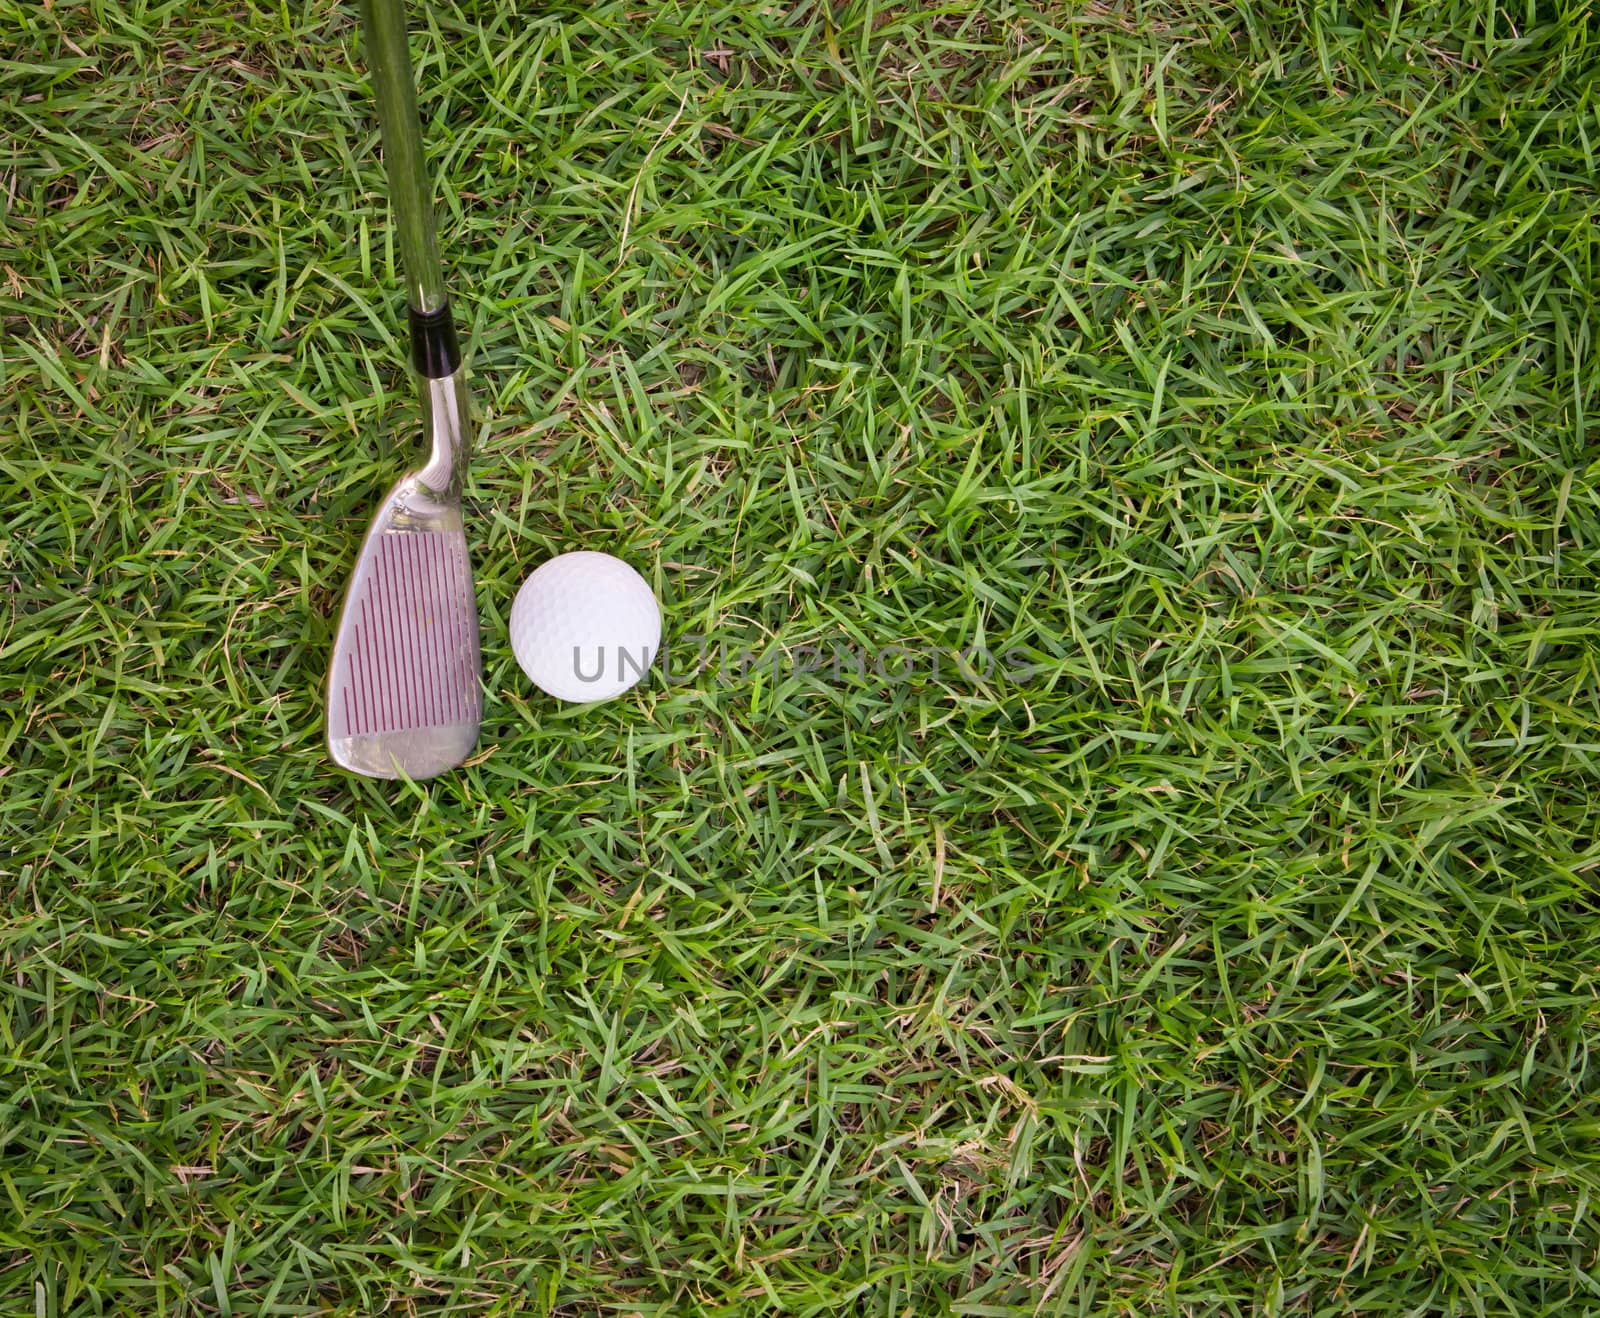 golf ball and iron on grass by tungphoto